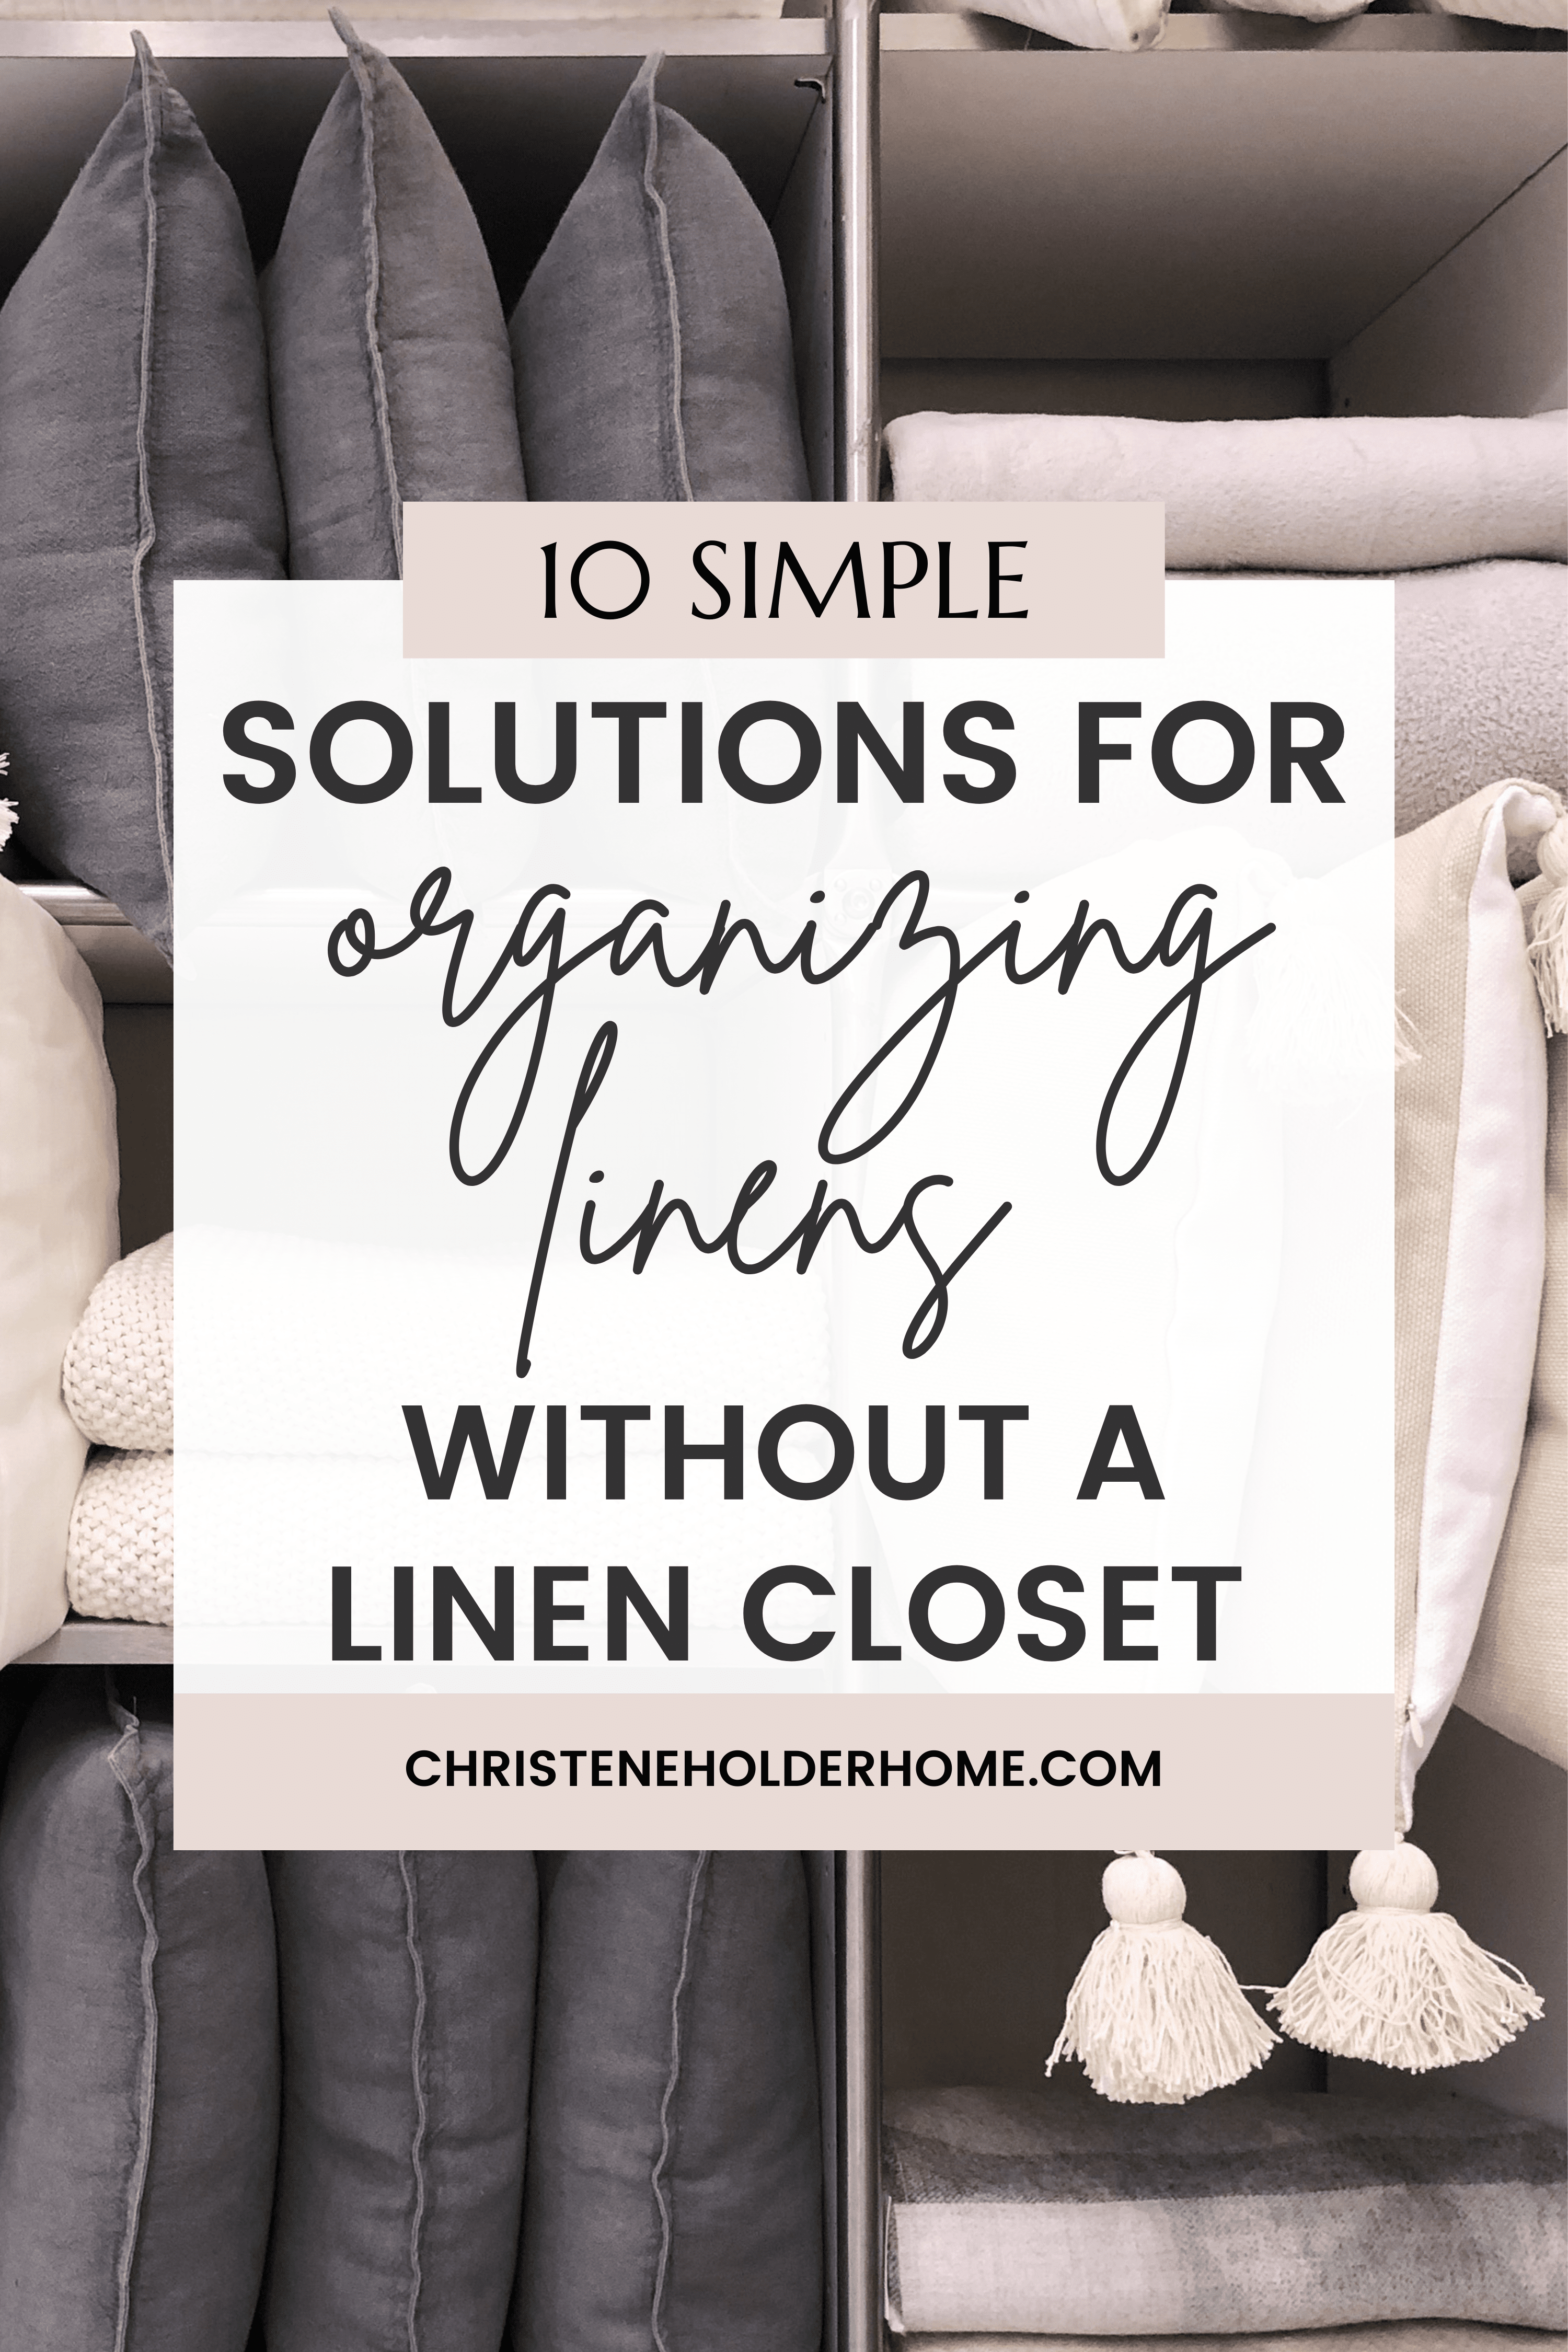 https://www.christeneholderhome.com/wp-content/uploads/2023/01/10-Simple-Solutions-for-Organizing-Linens-Without-a-Linen-Closet.png